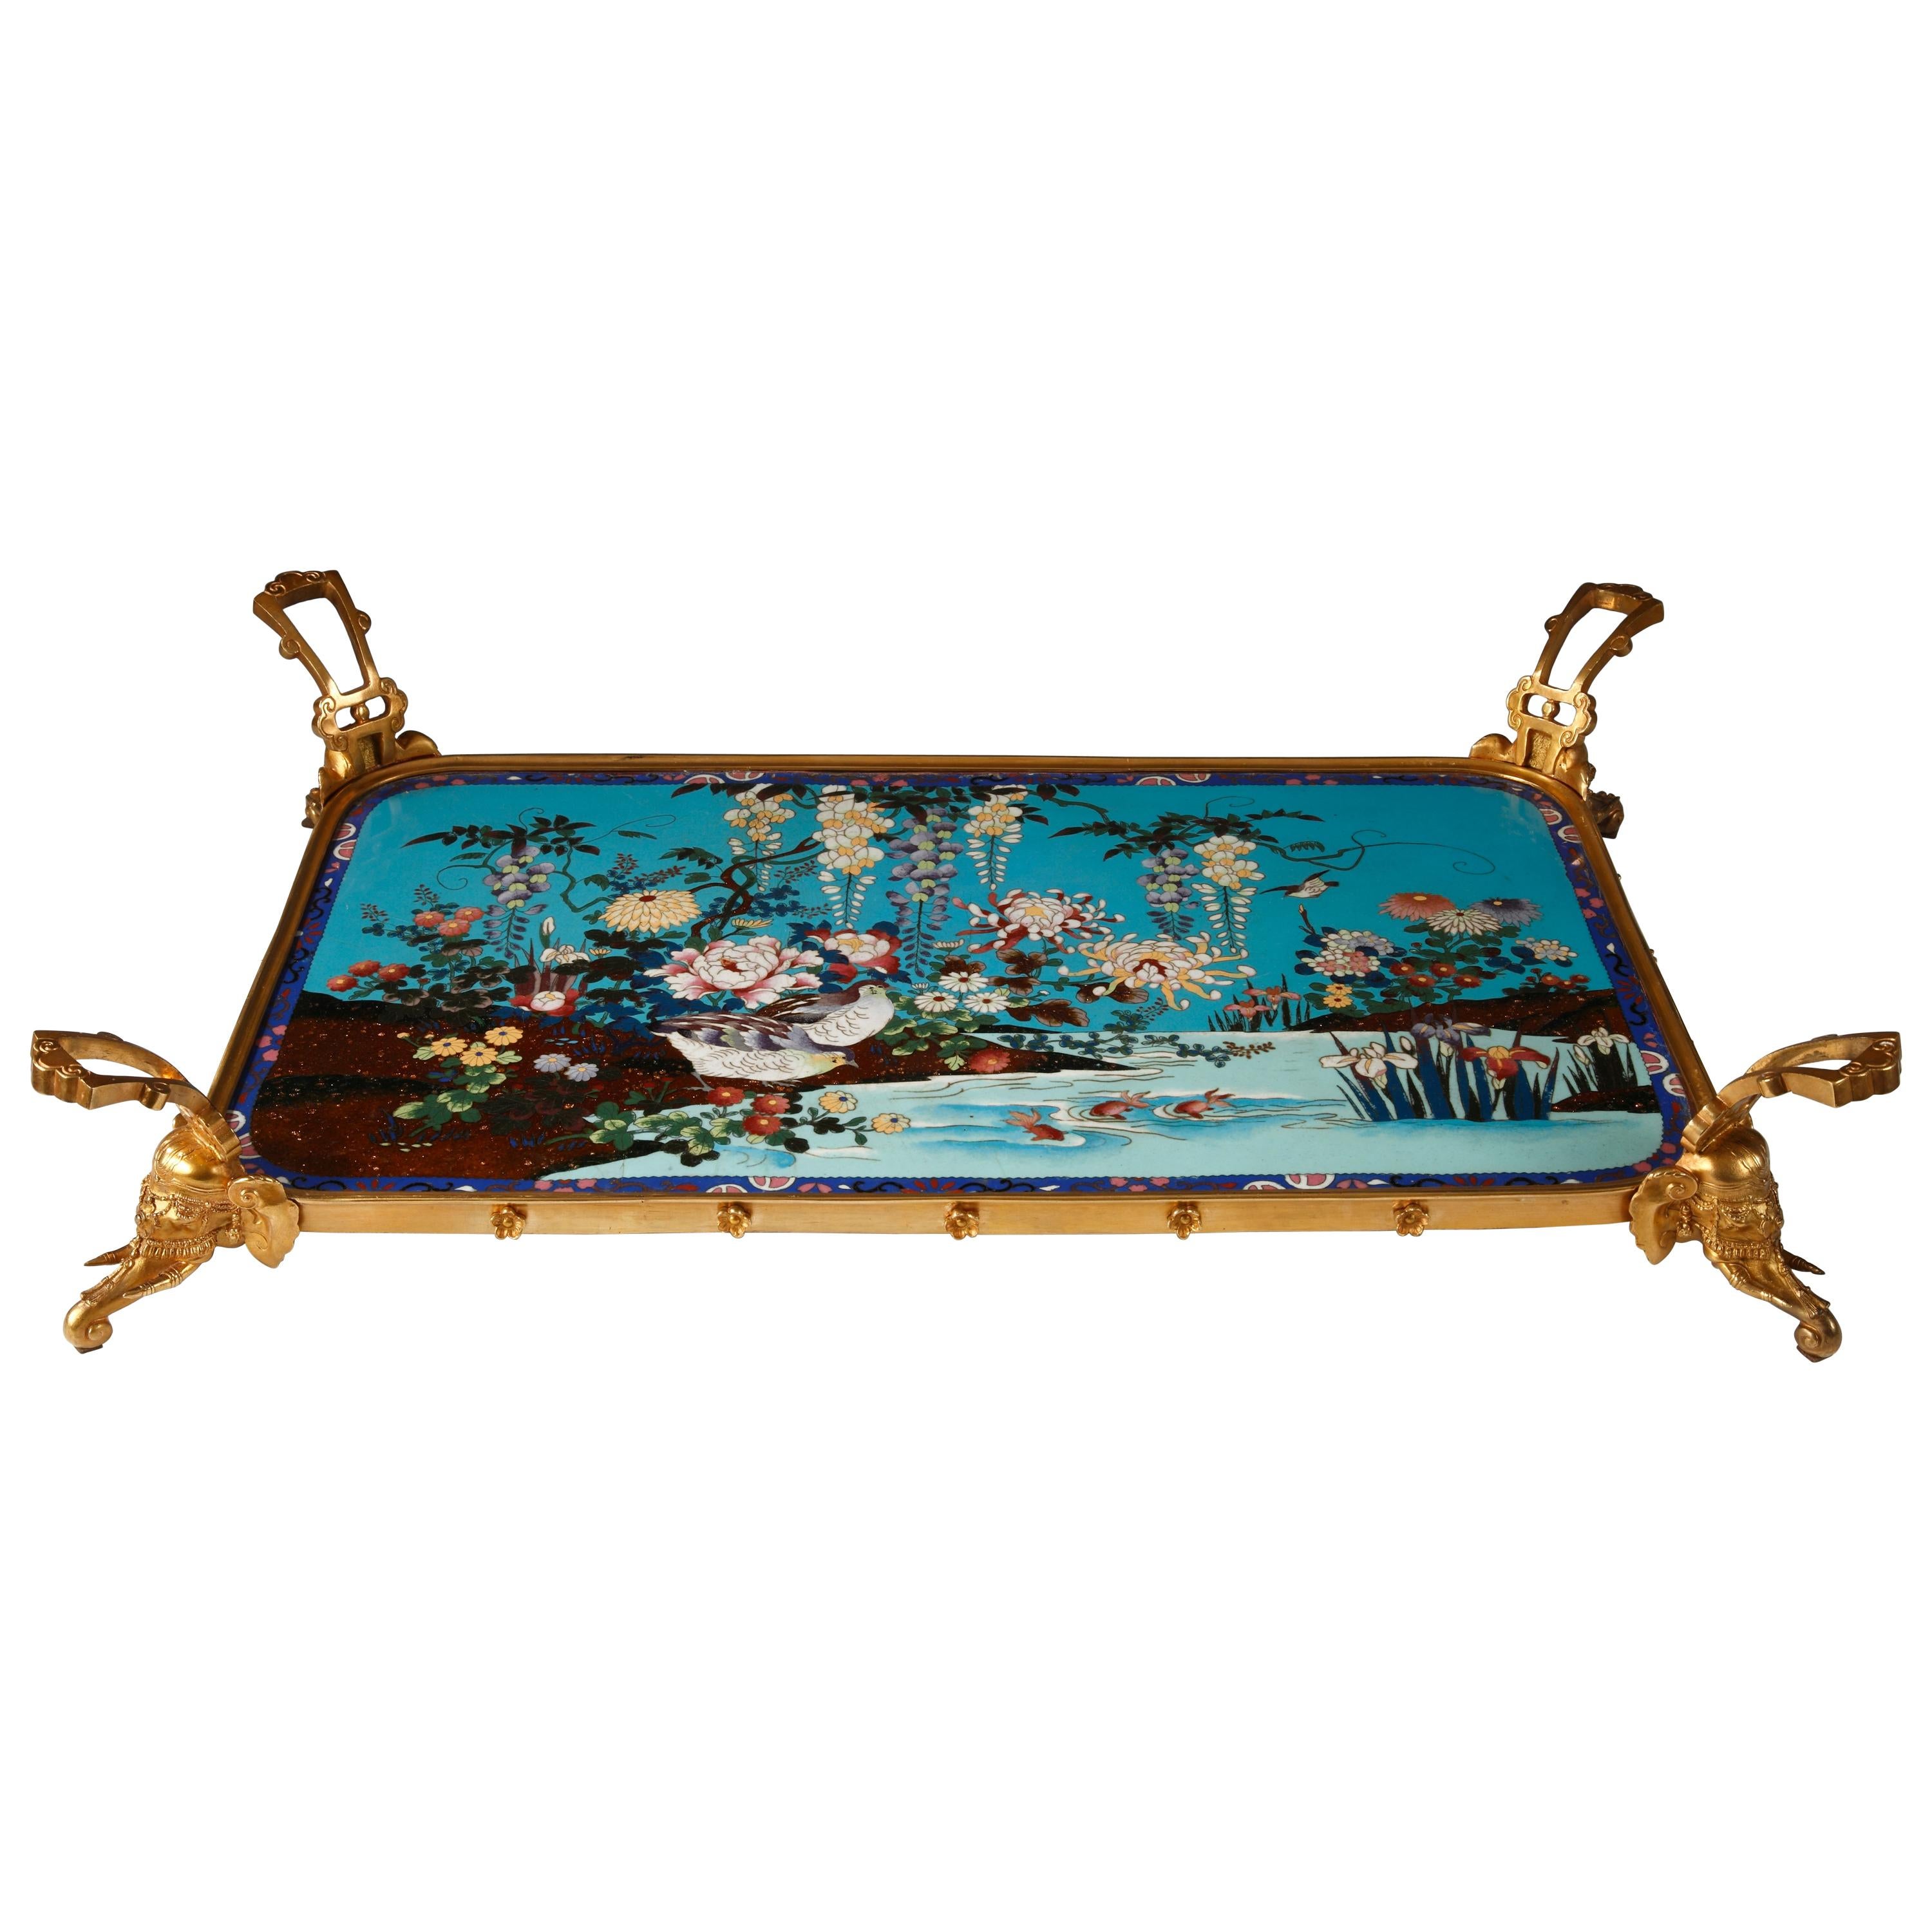 Japanese Style Tray Attributed to L.-C. Sevin & F. Barbedienne, France, c. 1860